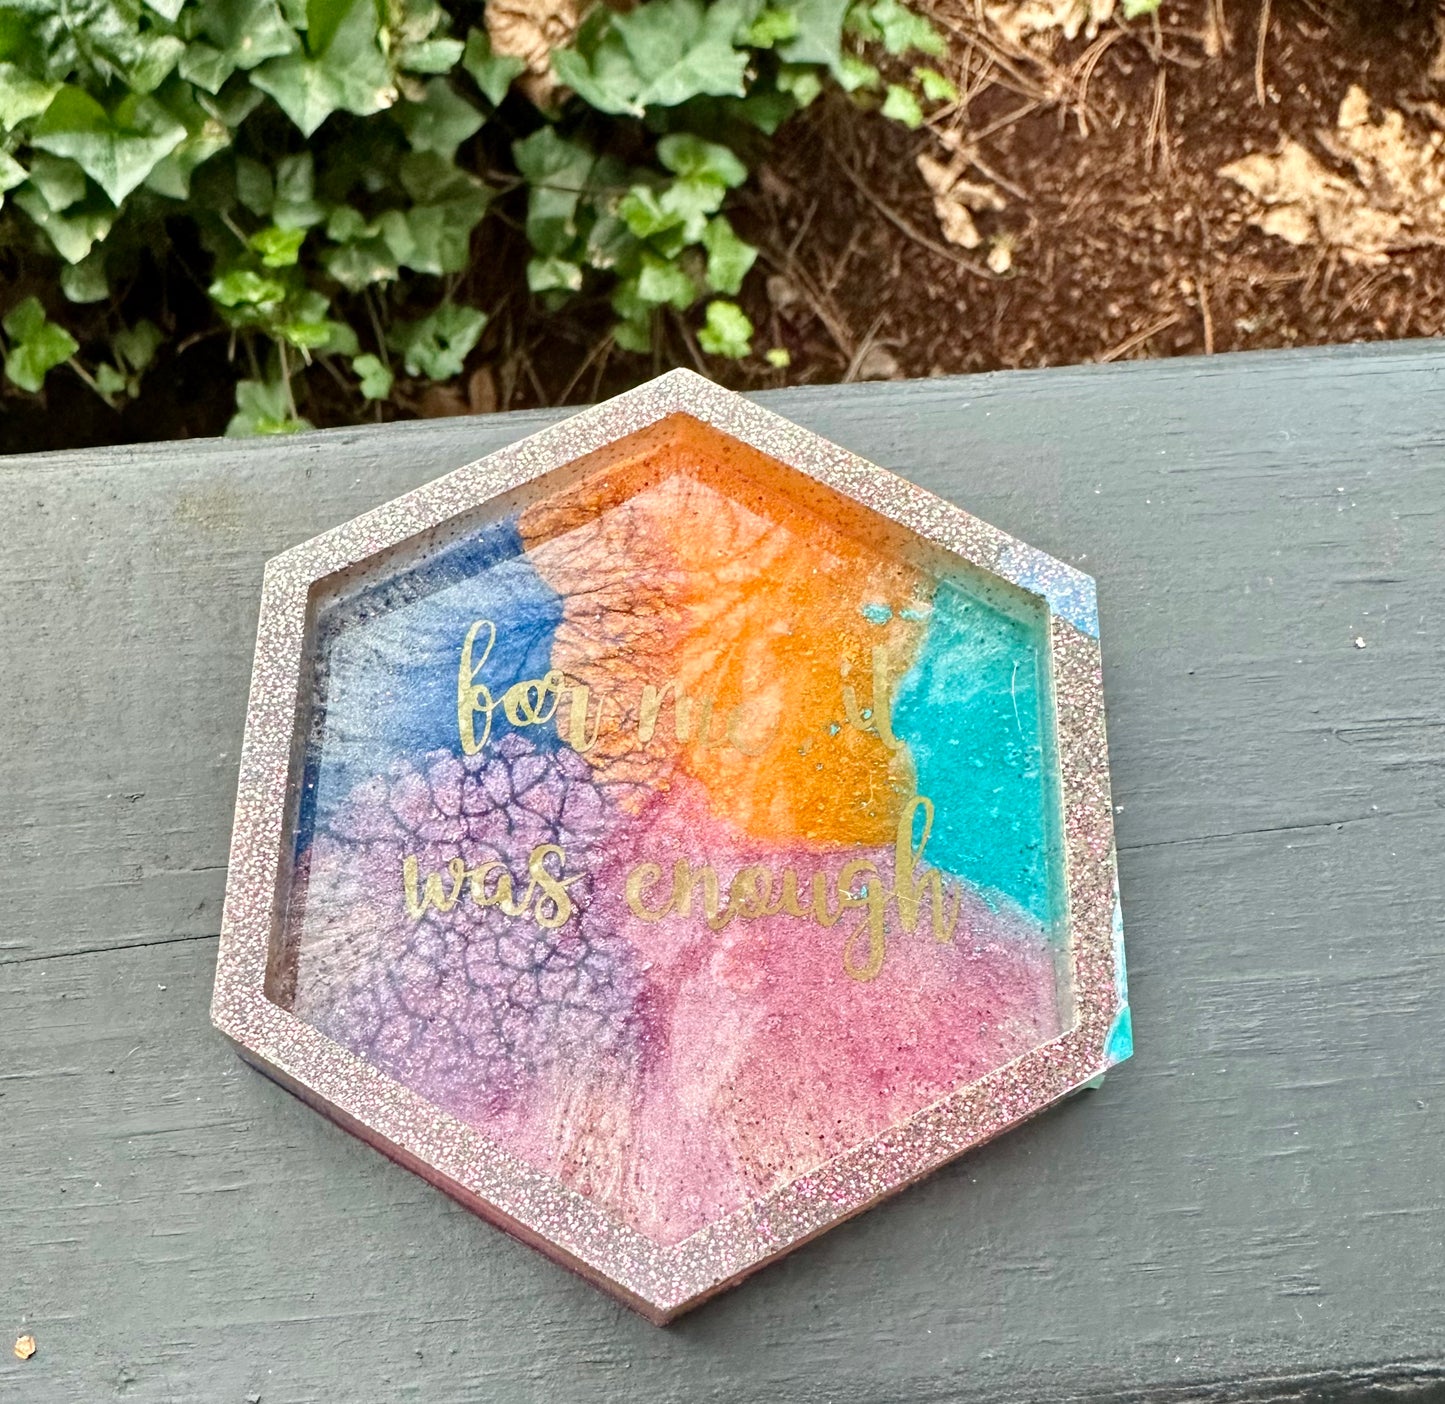 "For me it was enough" Small Resin Tray #2